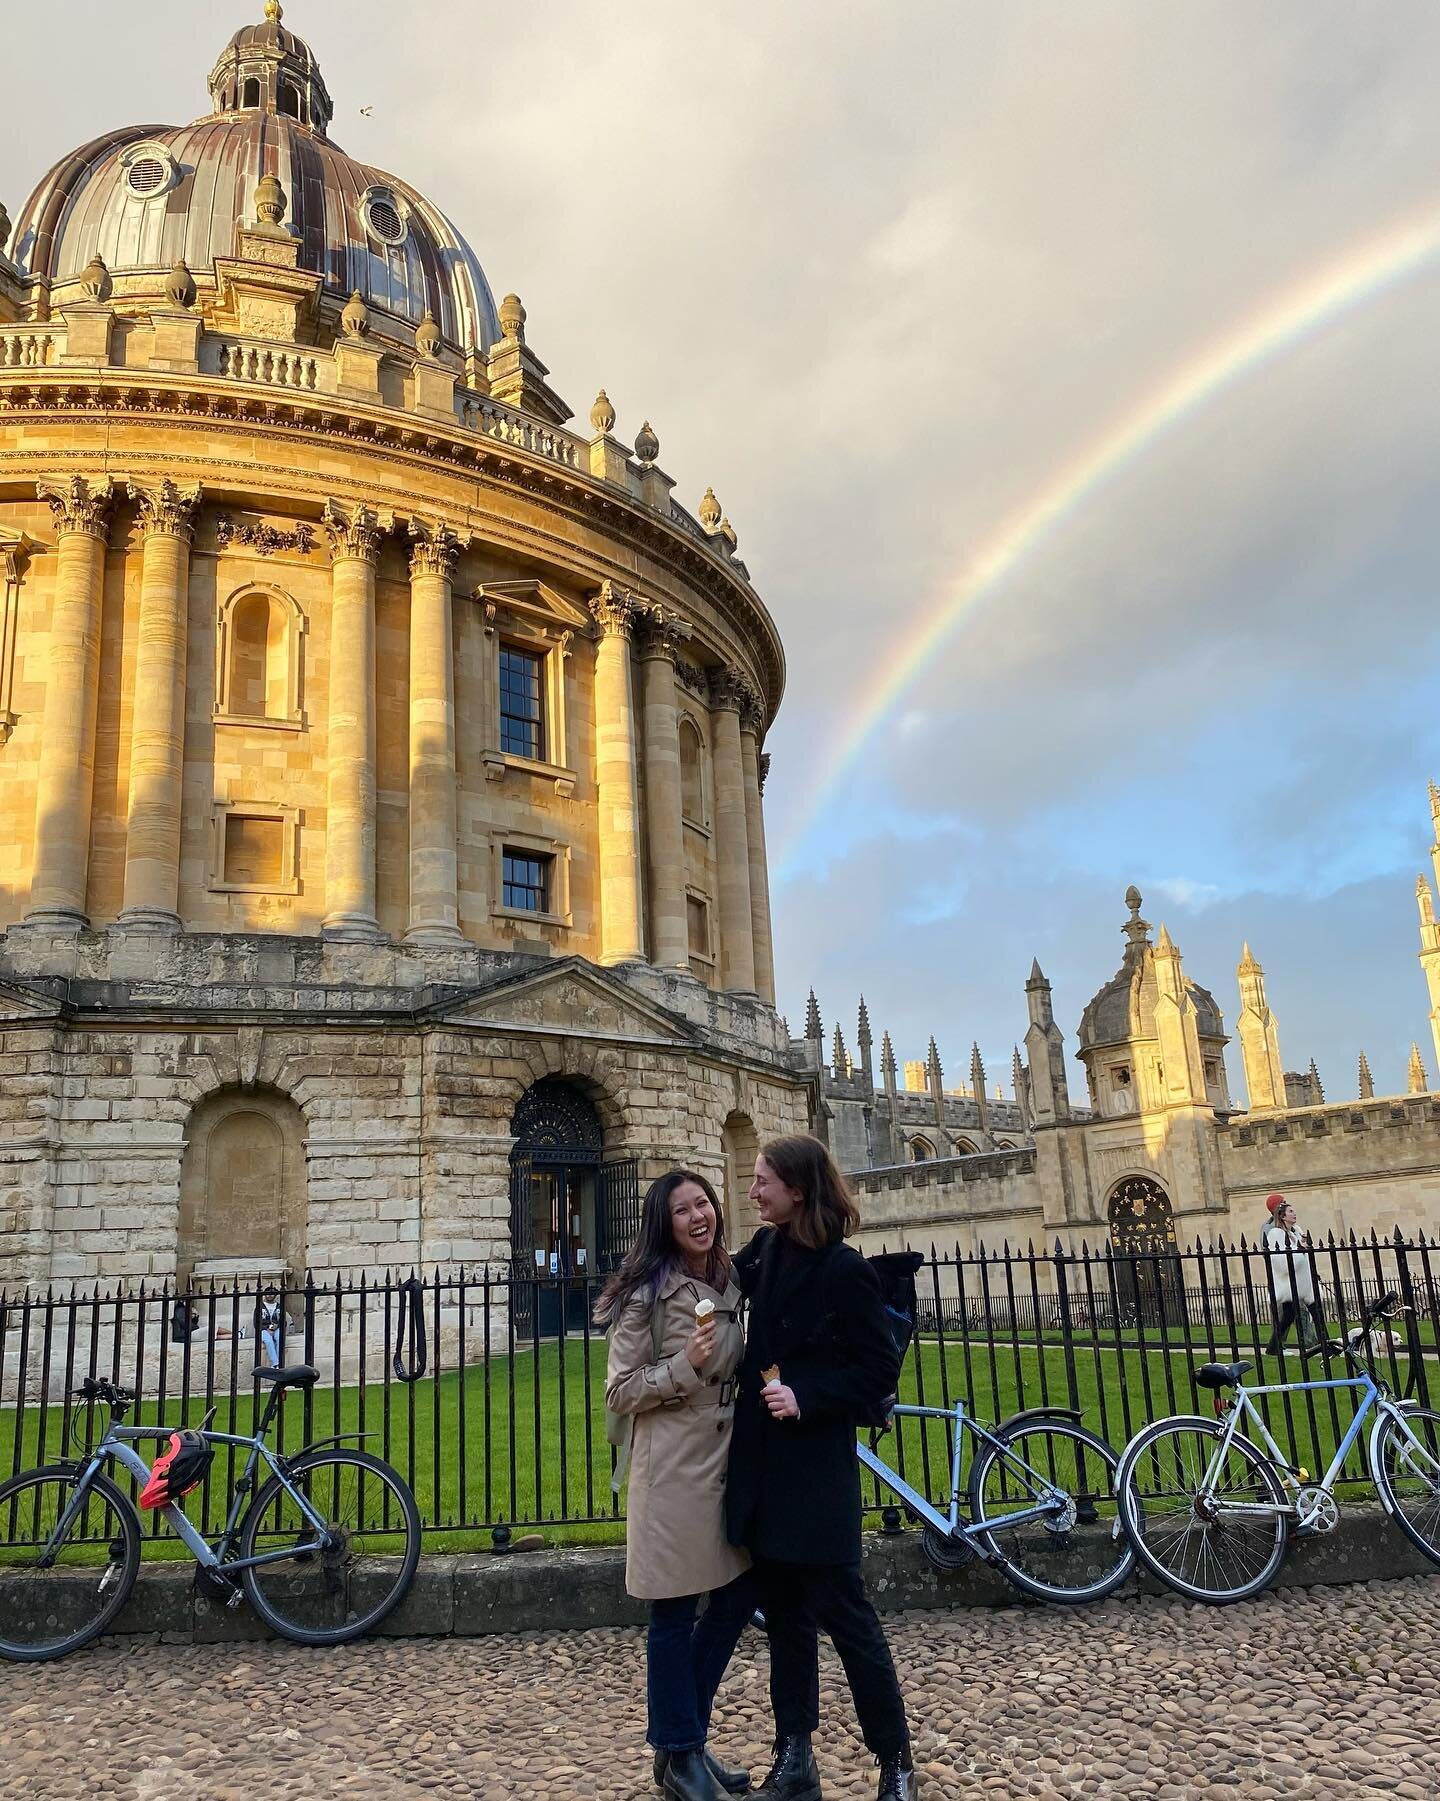 Rainbows over Oxford all week! 🌈🌈